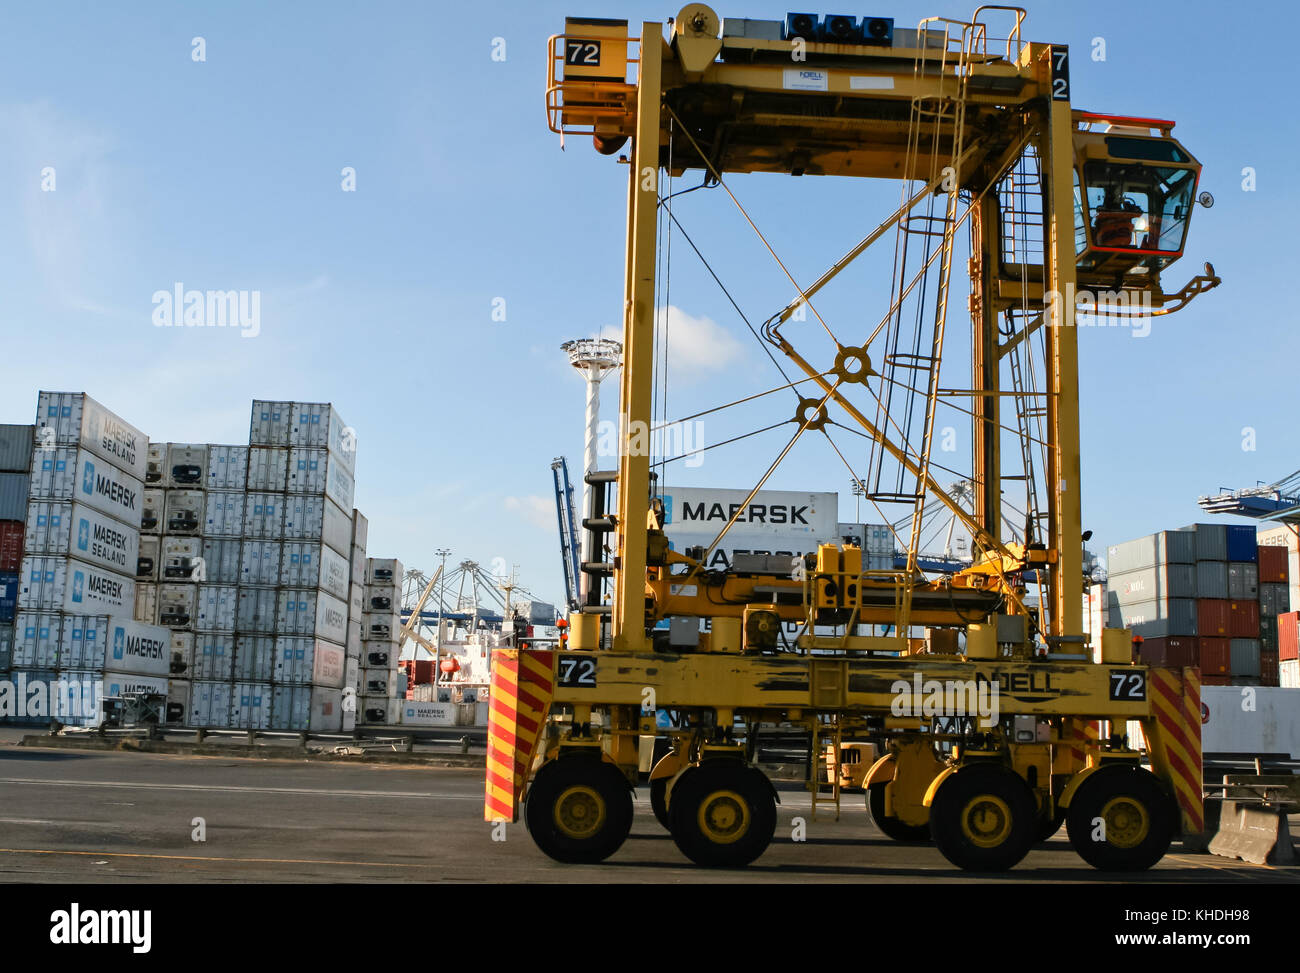 AUCKLAND, NEW ZEALAND - 17th APRIL 2012: One Noell straddle carrier and stack of Maersk containers at Auckland port. Stock Photo